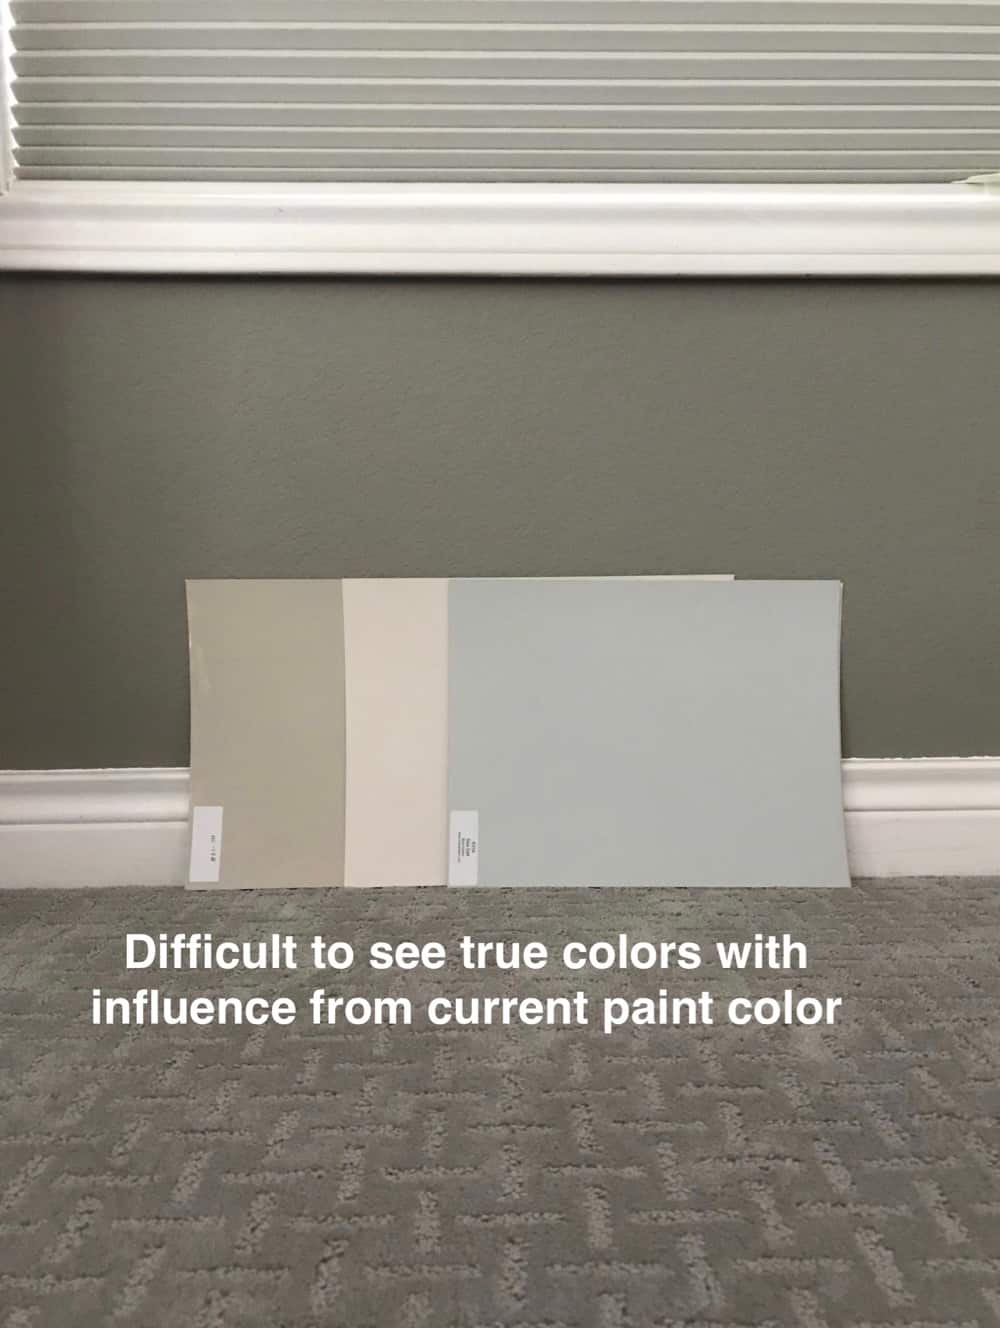 How to test paint colors